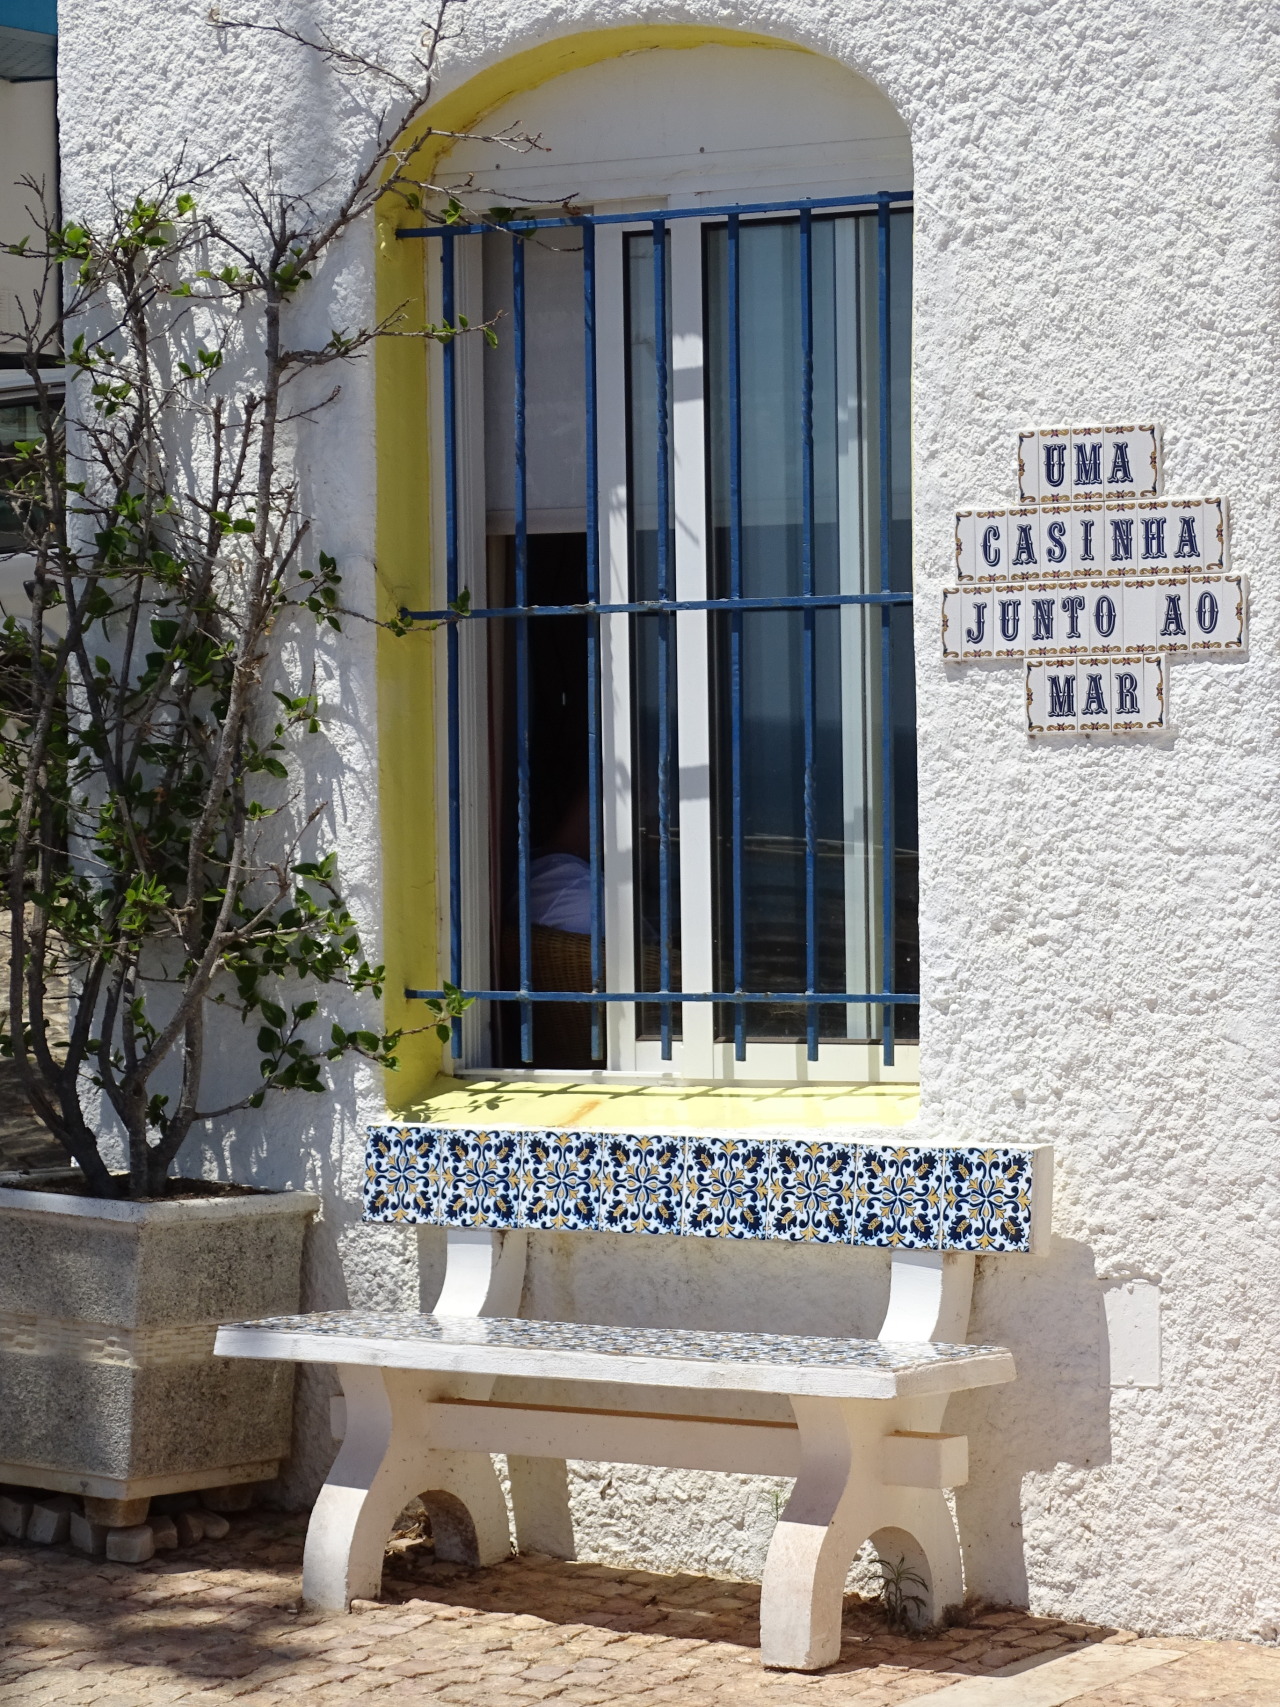 Invitation to RestWhat do you think about my pic?     #Albufeira#Algarve#Portugal#bench#window#gate#white house#travel#flower pot#original photography#cityscape#tourist attraction#landmark#architecture#summer 2021#Iberia#Southern Europe #photo of the day  #What do you think about my pic? #yellow#blue#tiles#vacation#façade#exterior